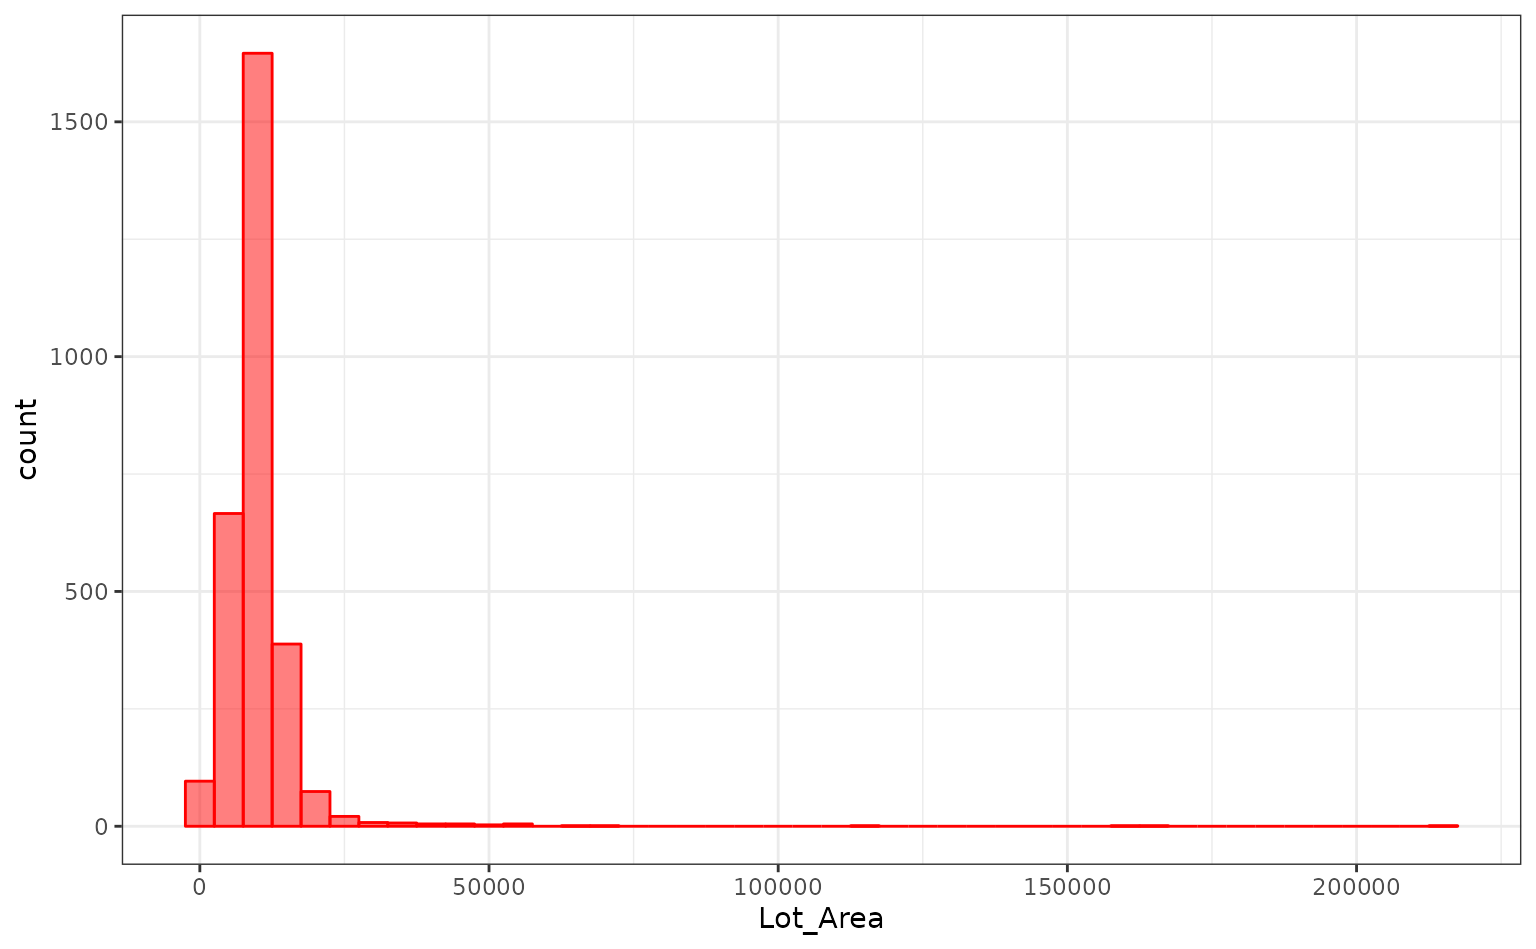 The histogram of the lot size, showing a long right tail of the empirical distribution.